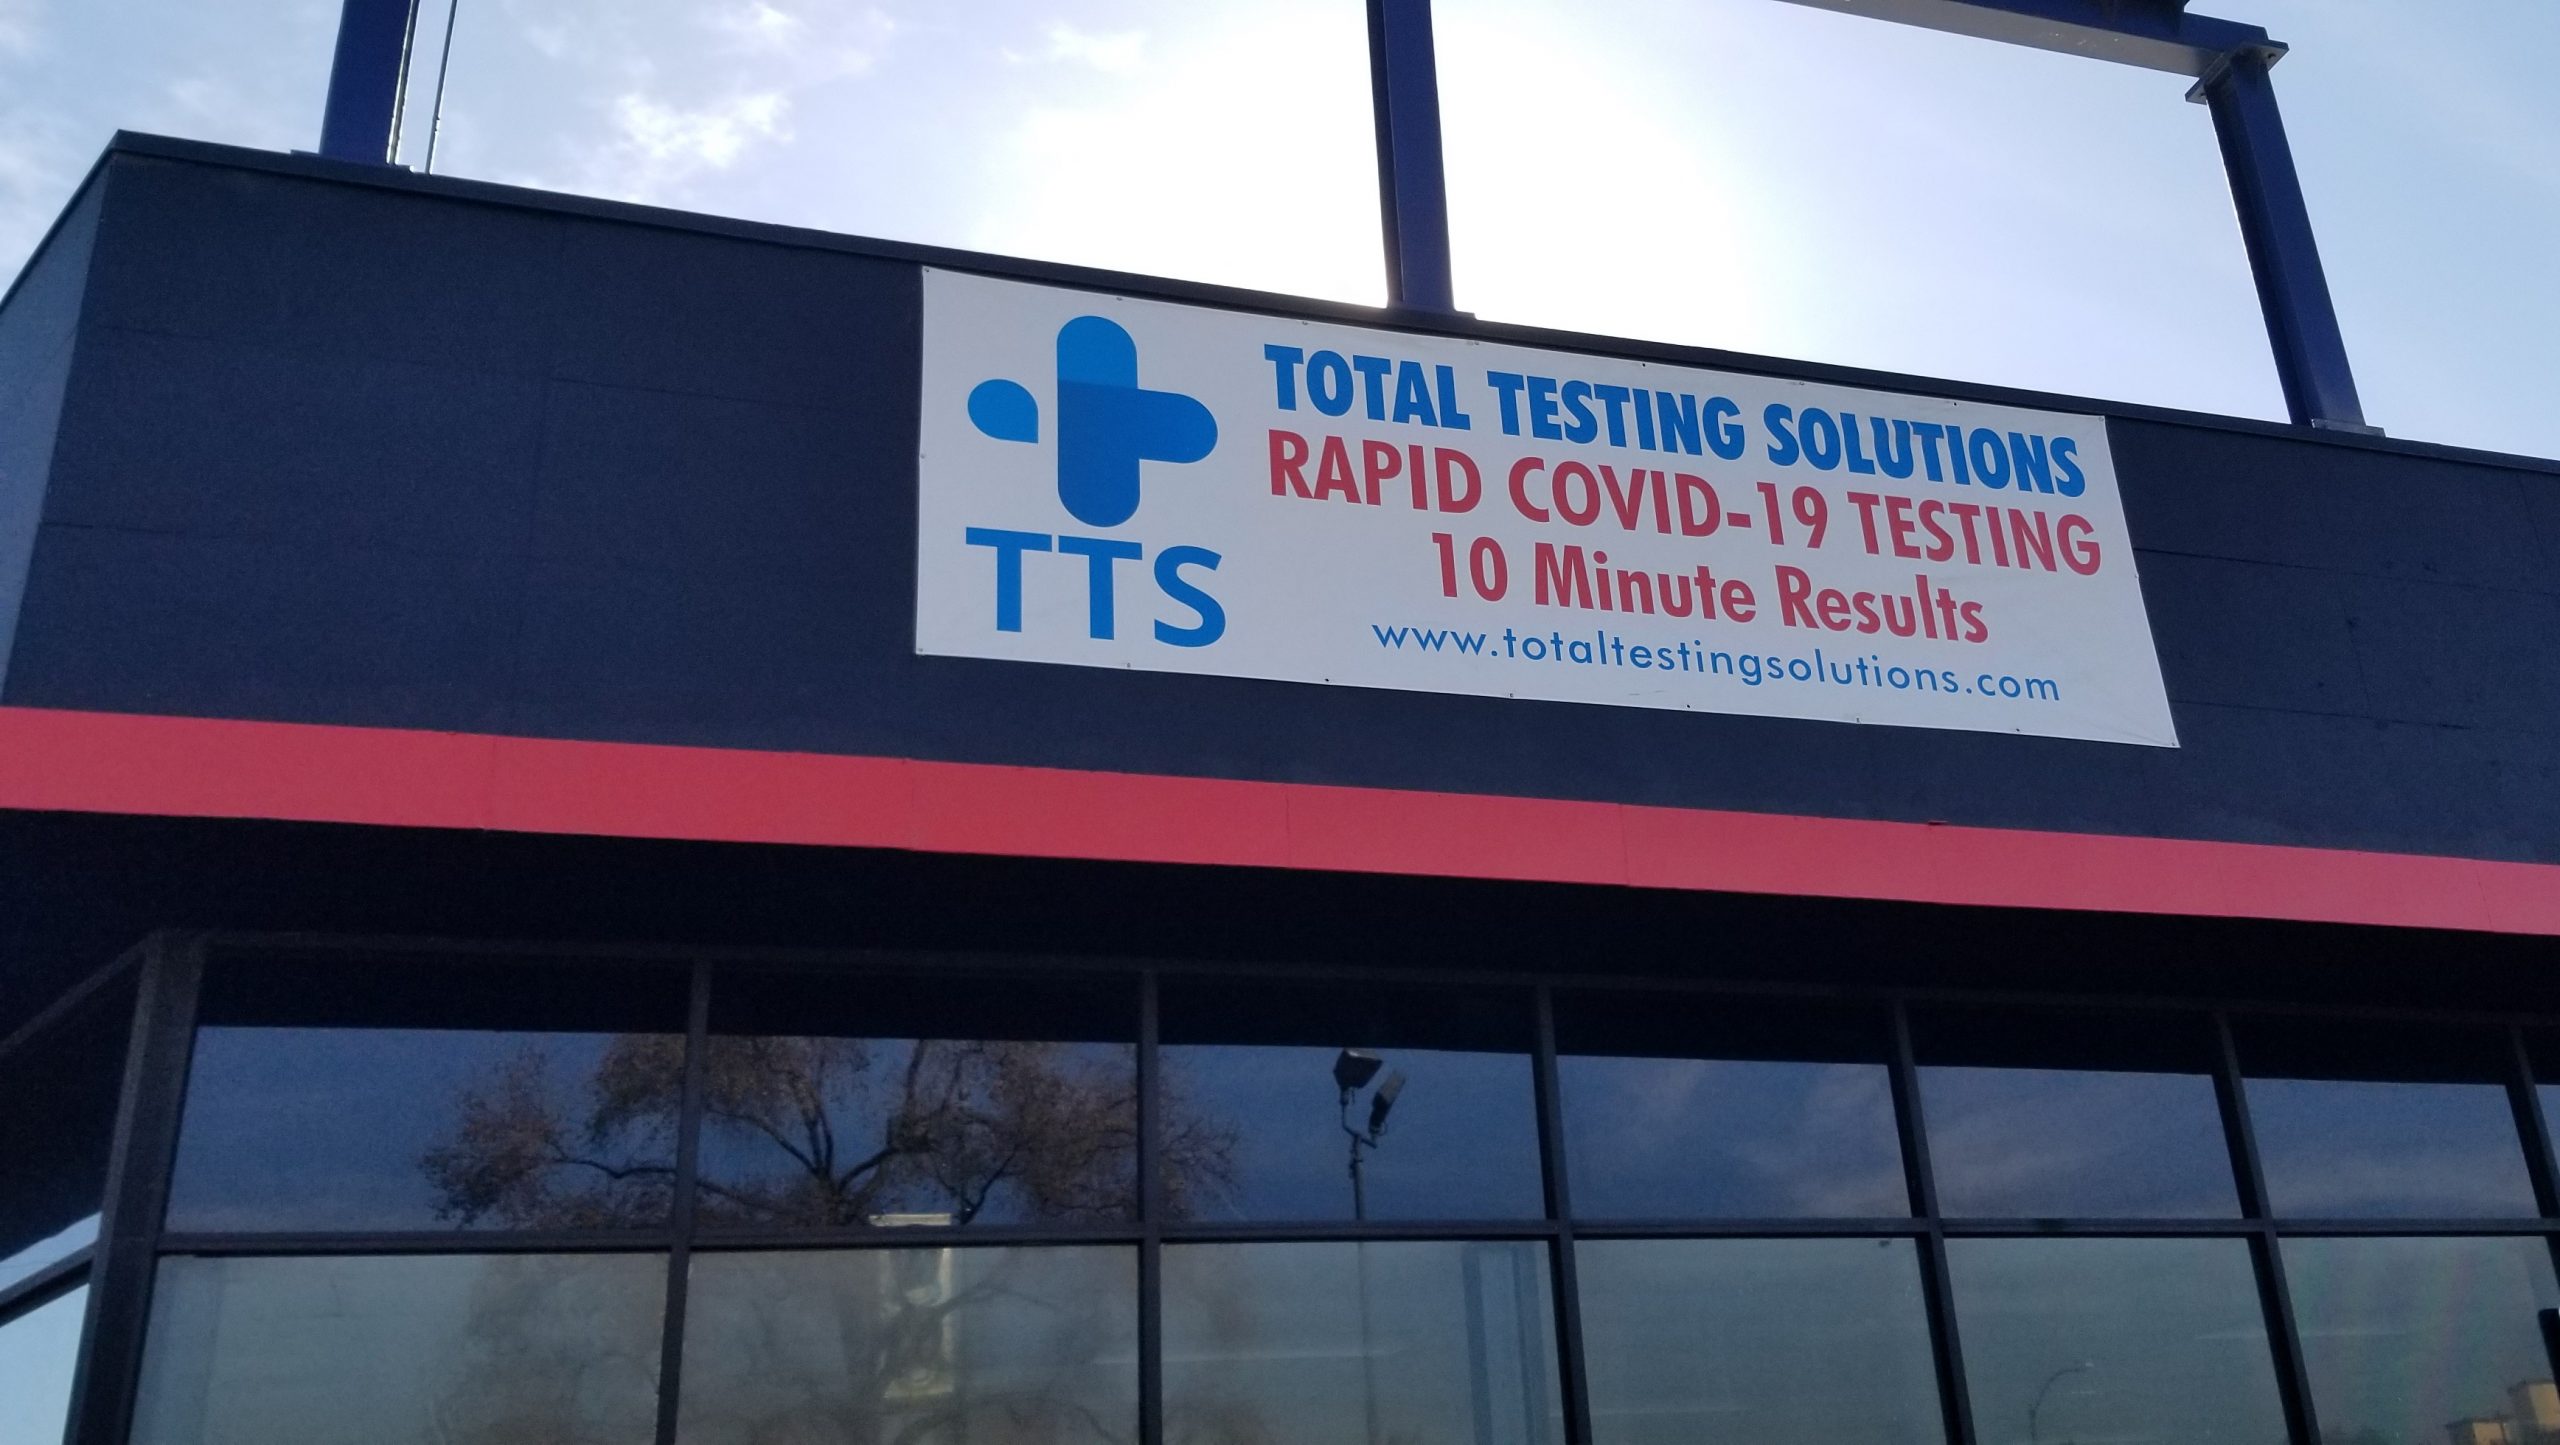 Clinics and facilities can boost visibility with testing center banners, people can see what is being offered and will be encouraged to drop in for a test.